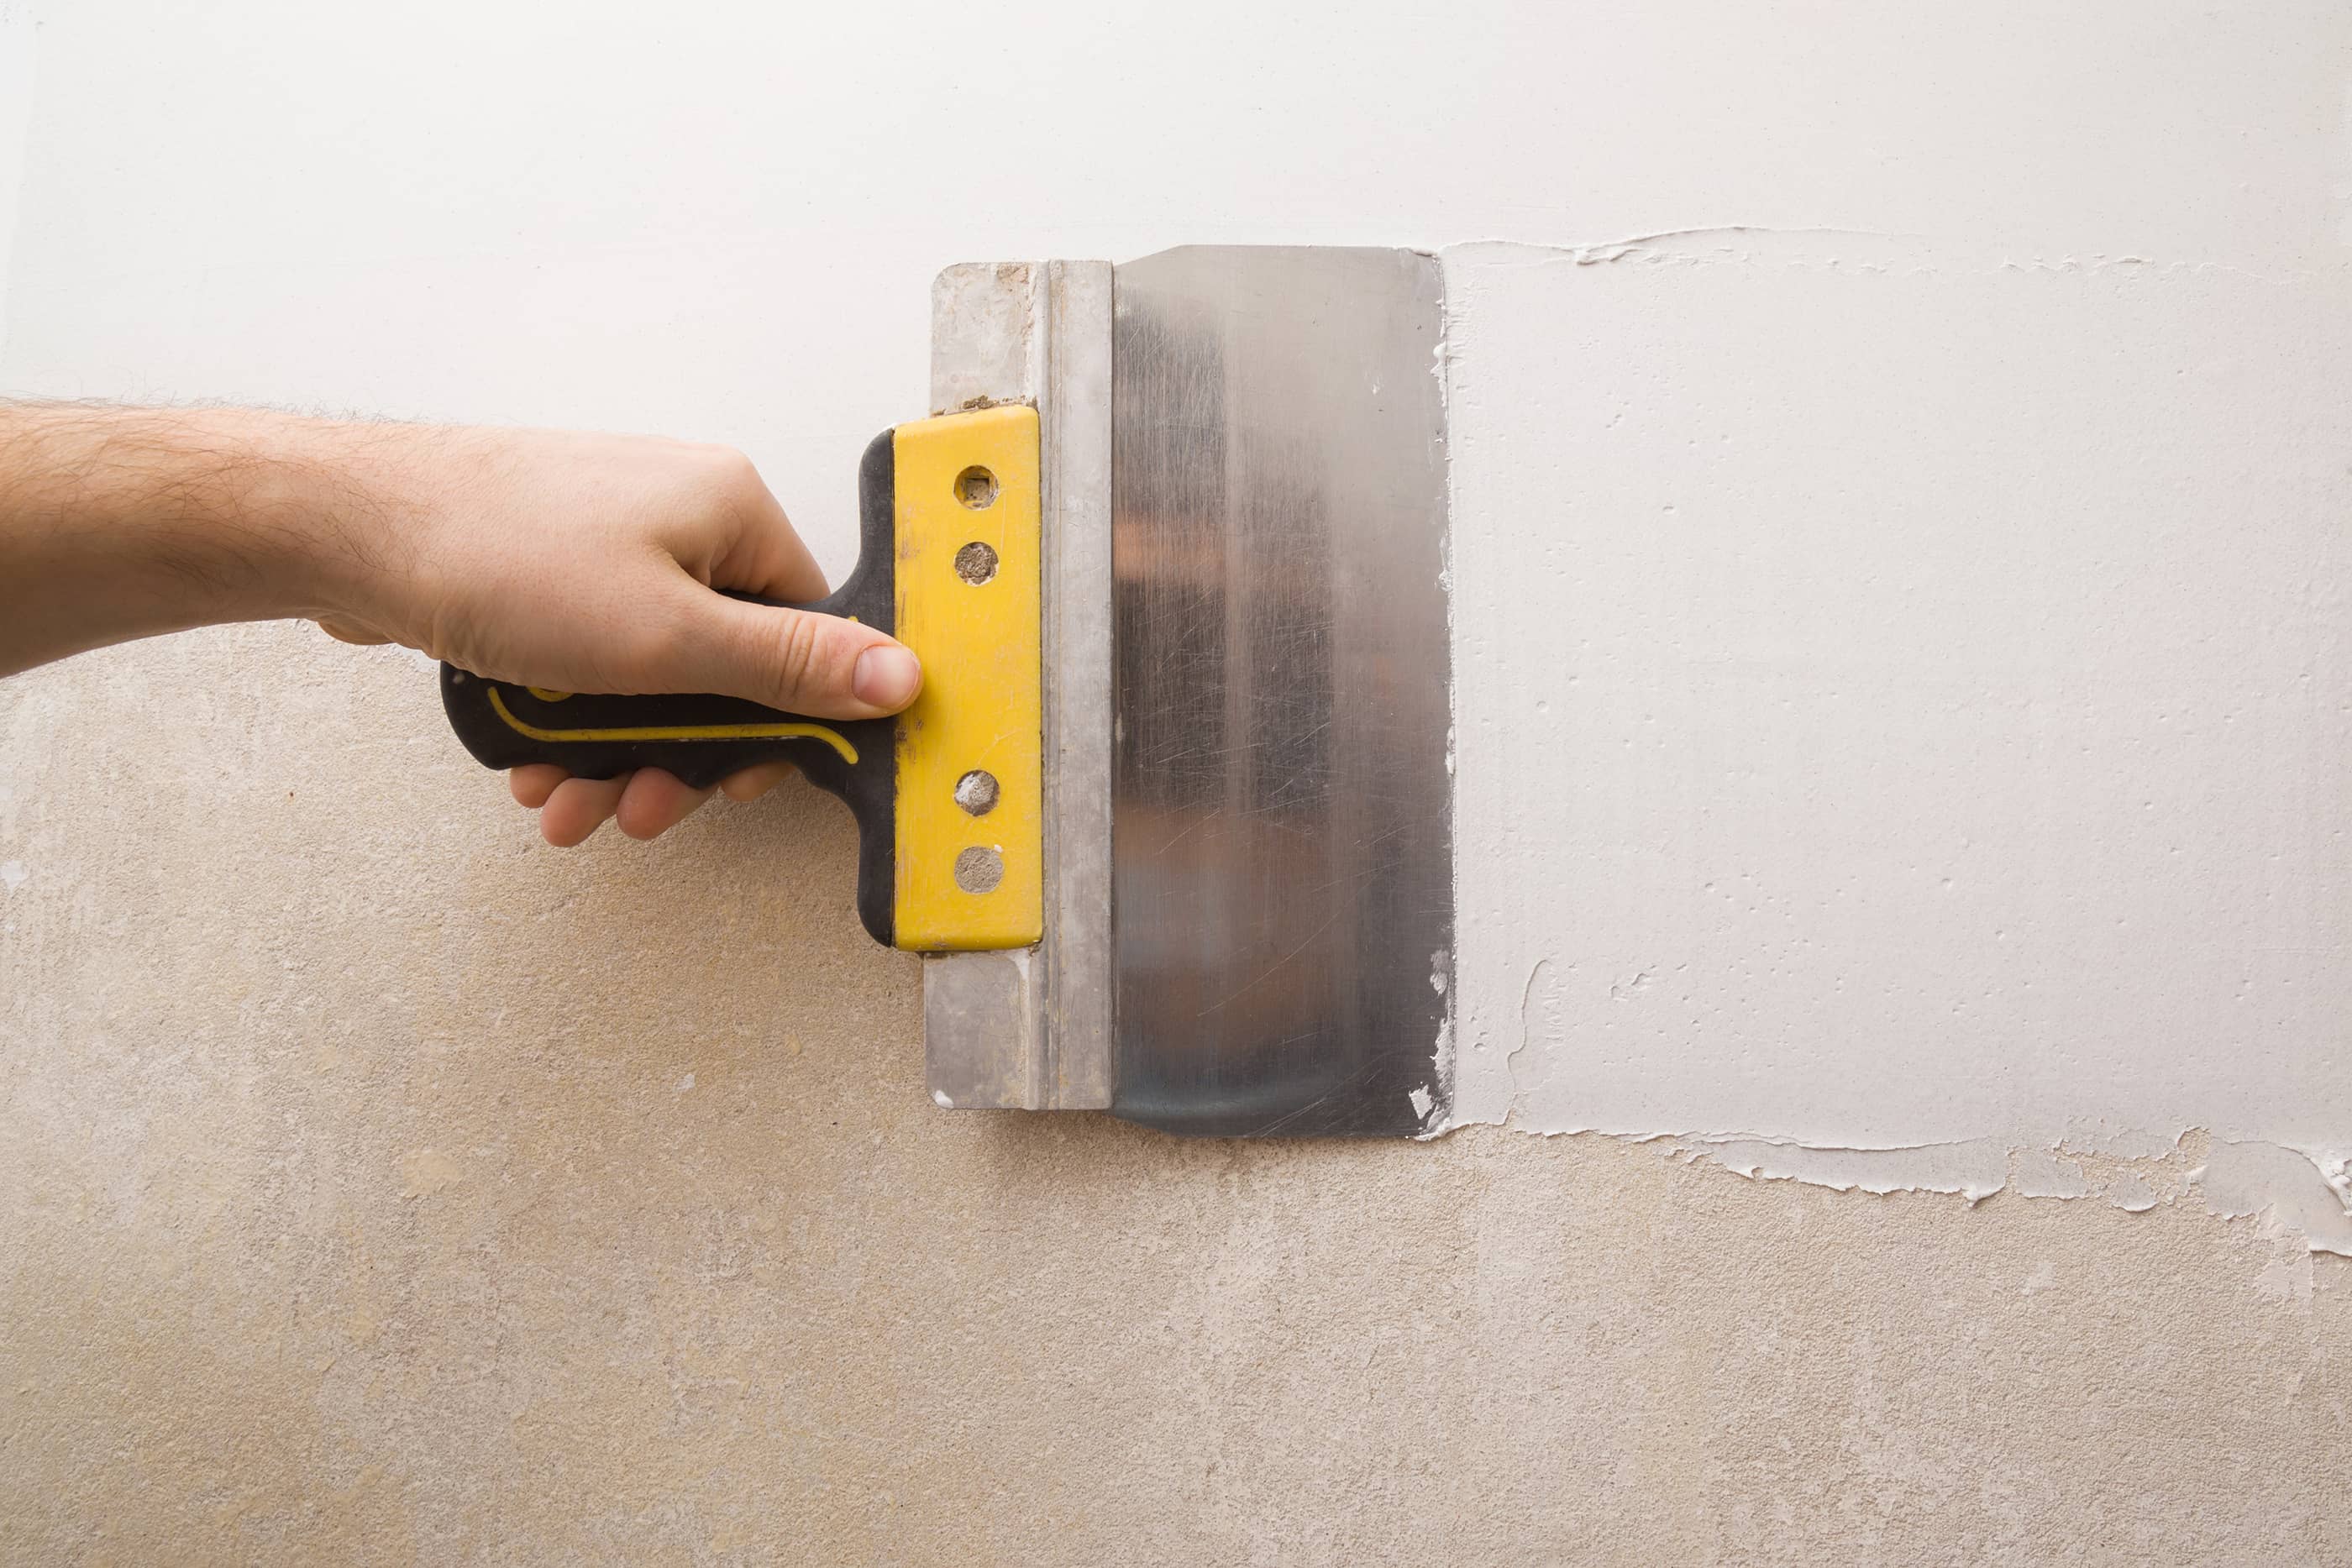  Use the putty knife to apply drywall plaster over the new piece of drywall, including the mesh tape